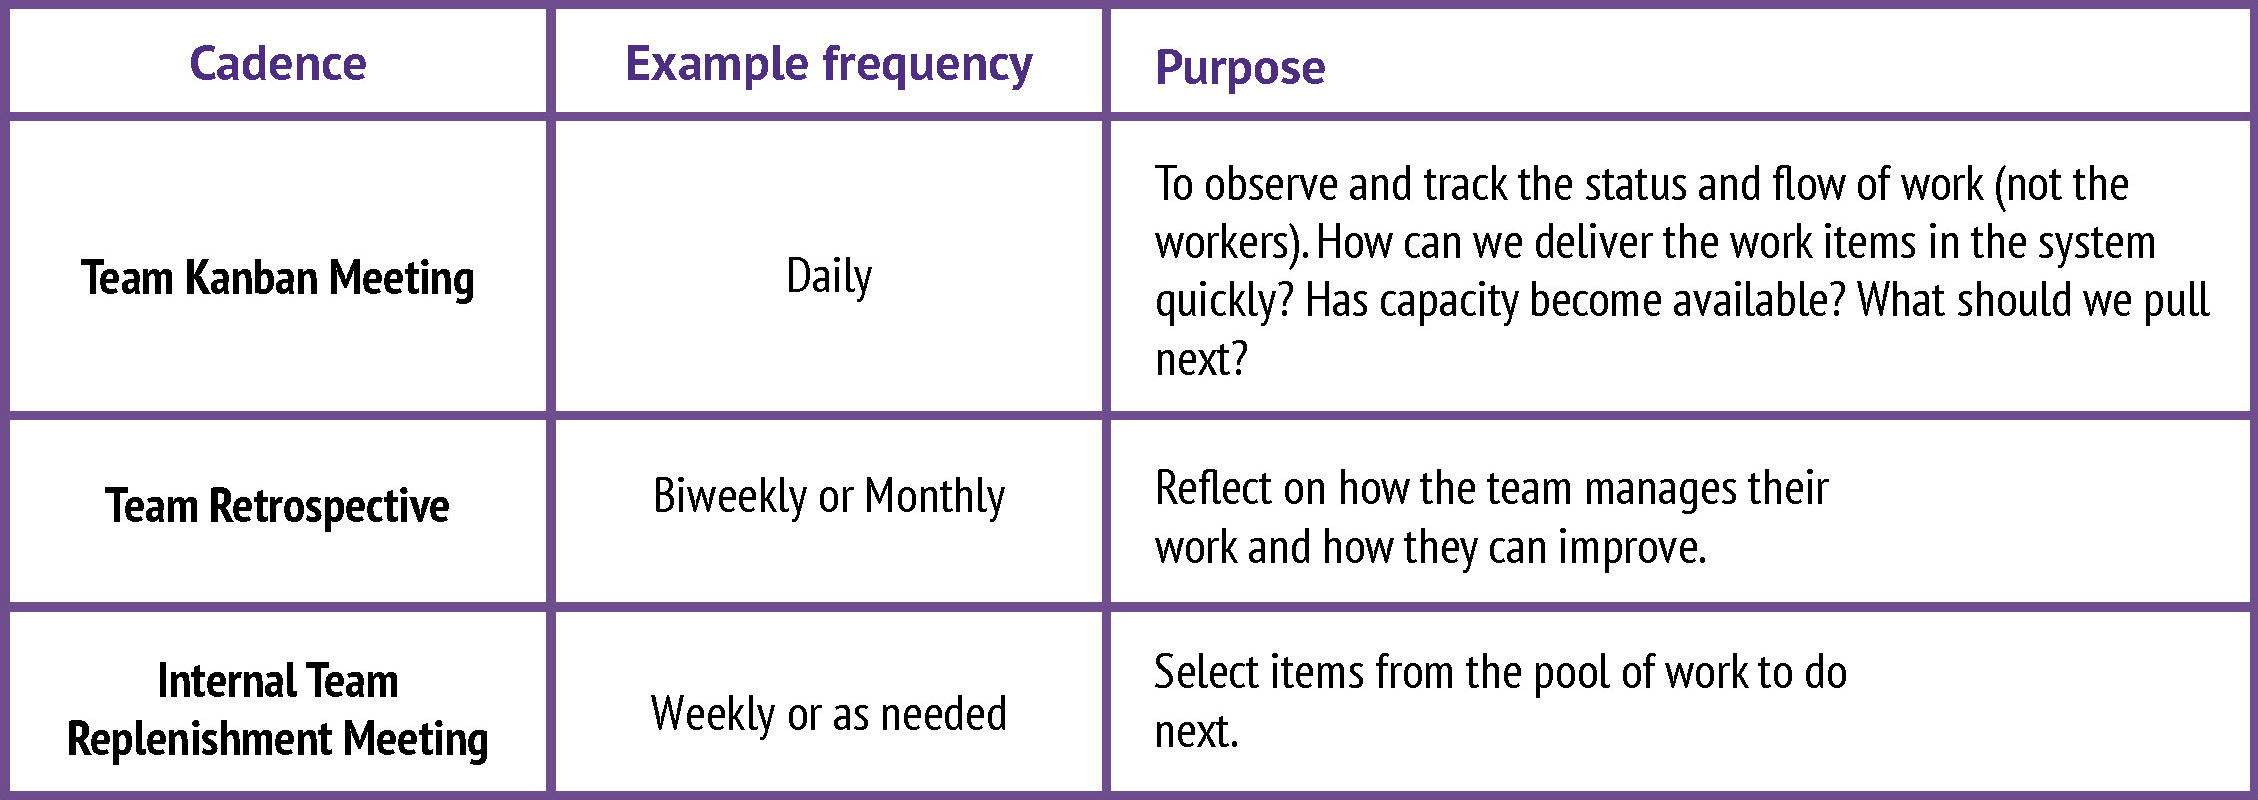 Cadence Frequency Purpose